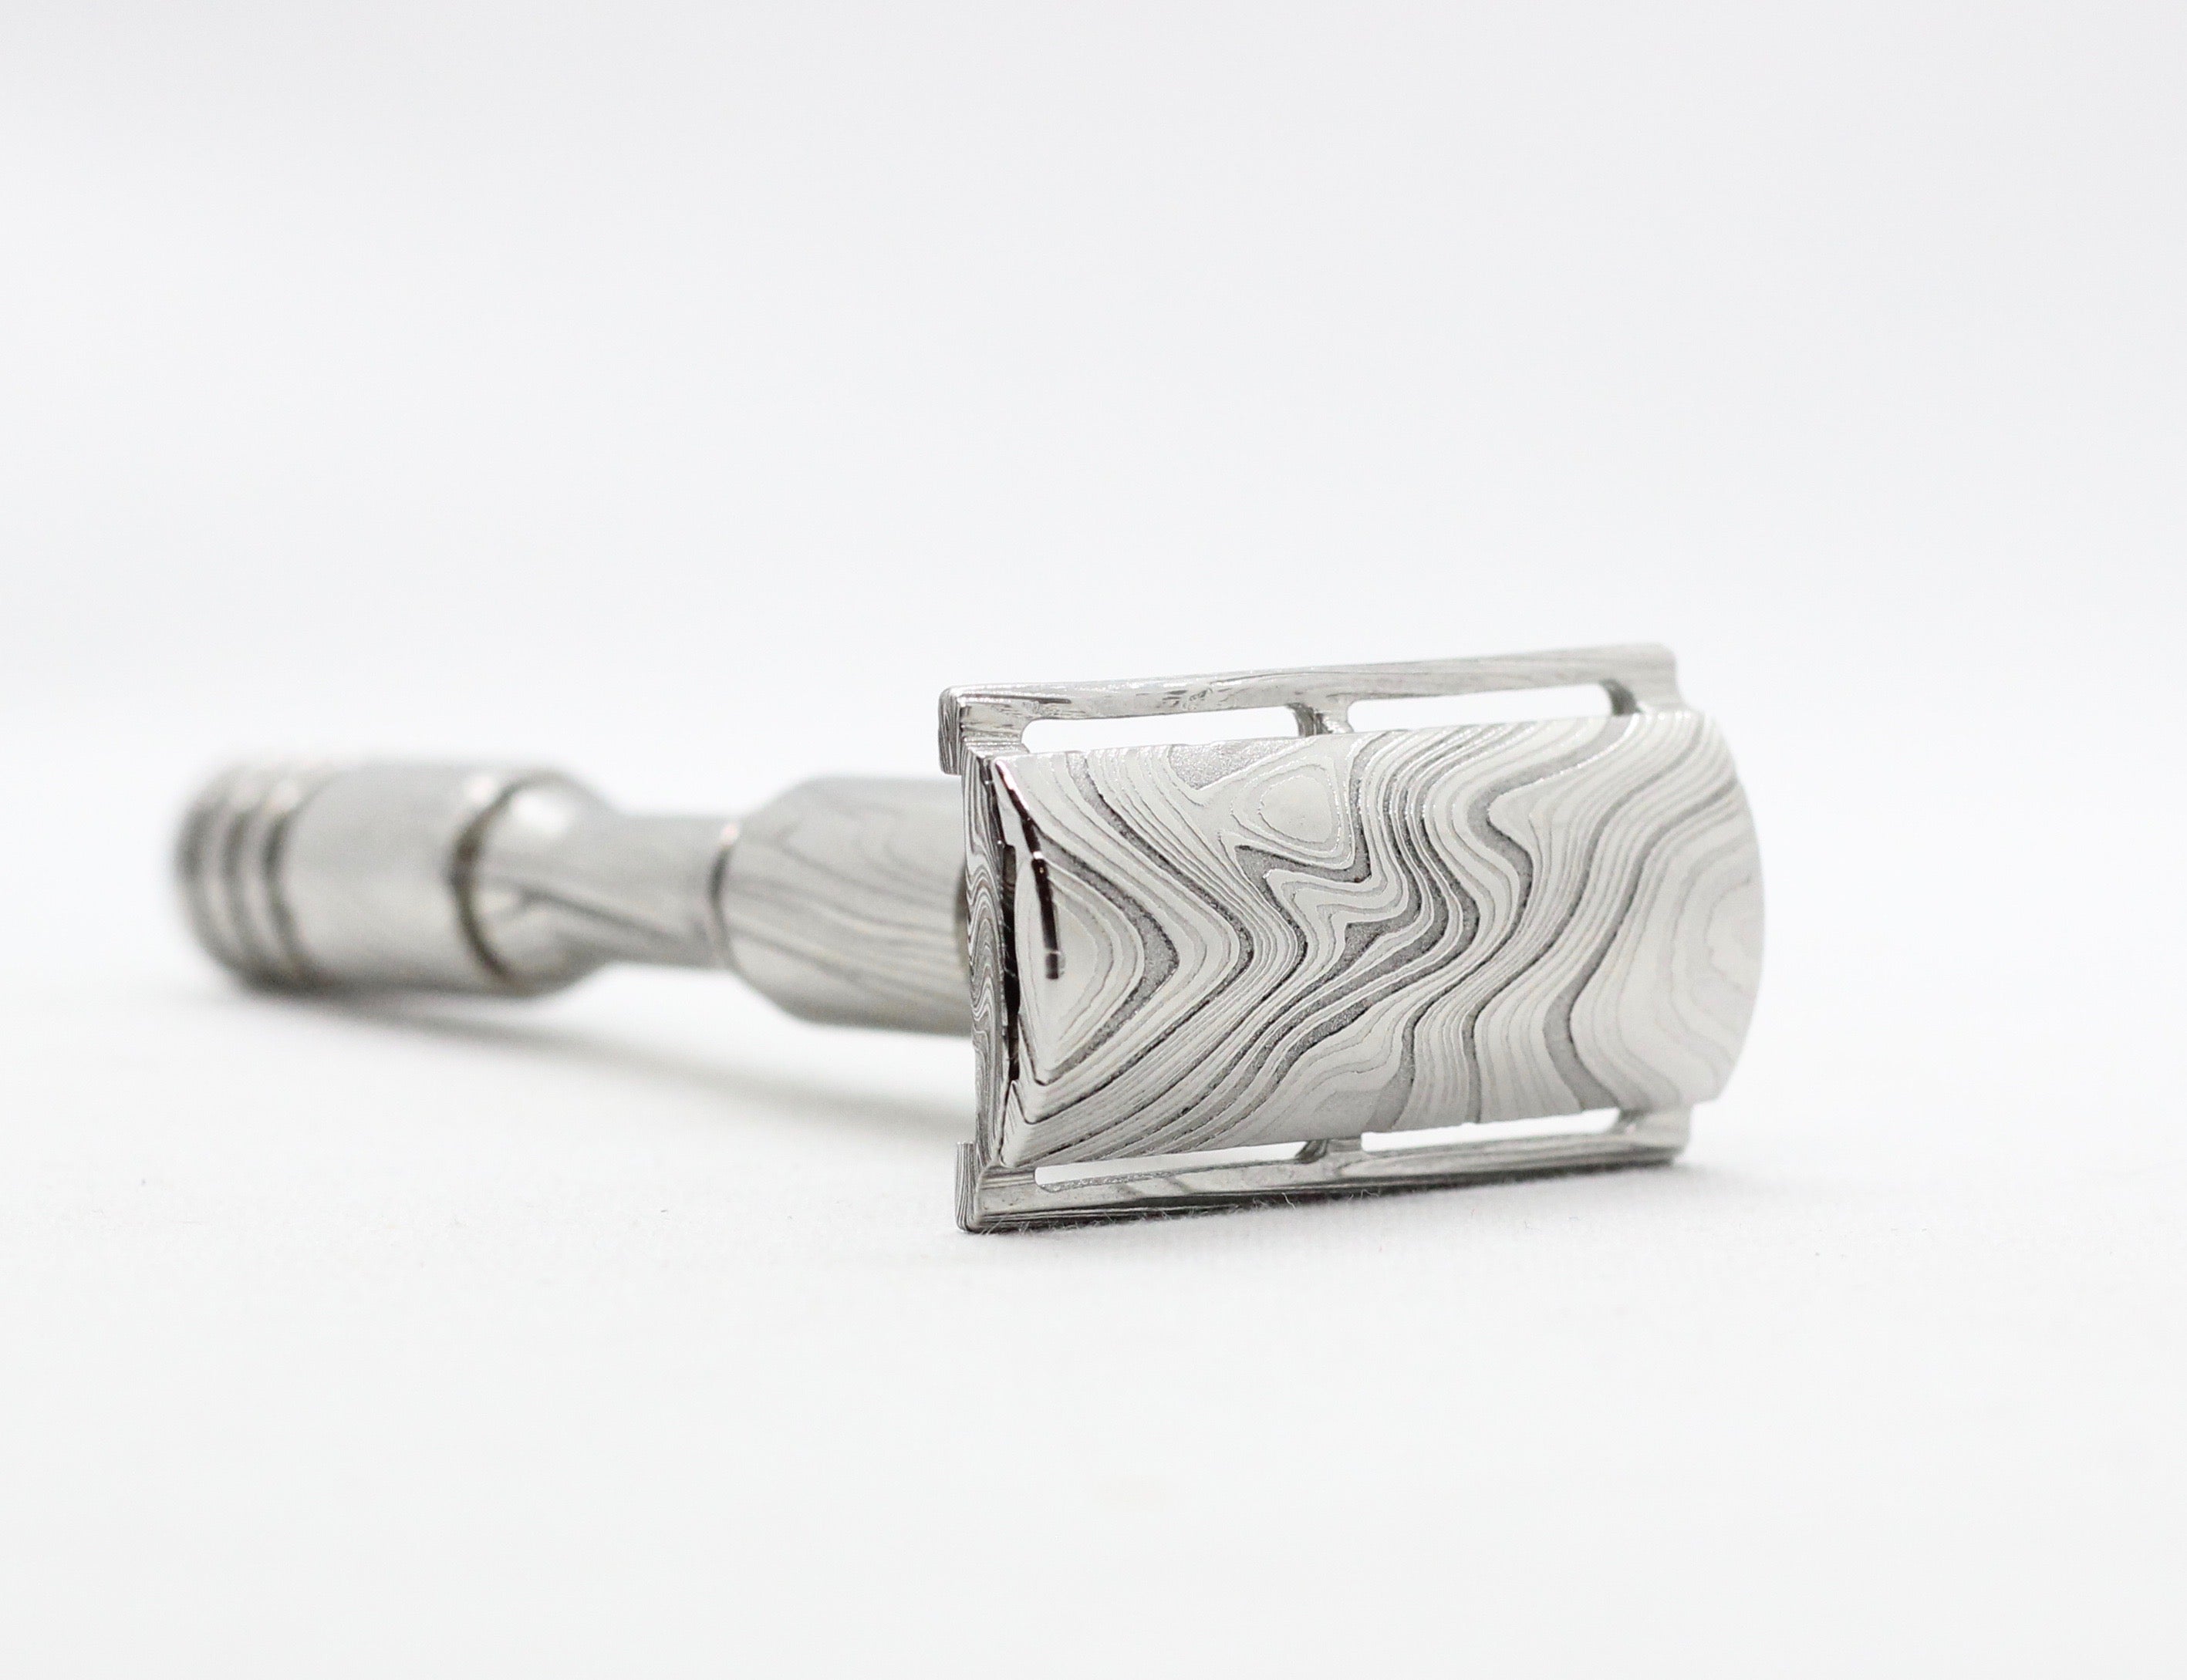 Damascus Steel Safety Razor and its origins